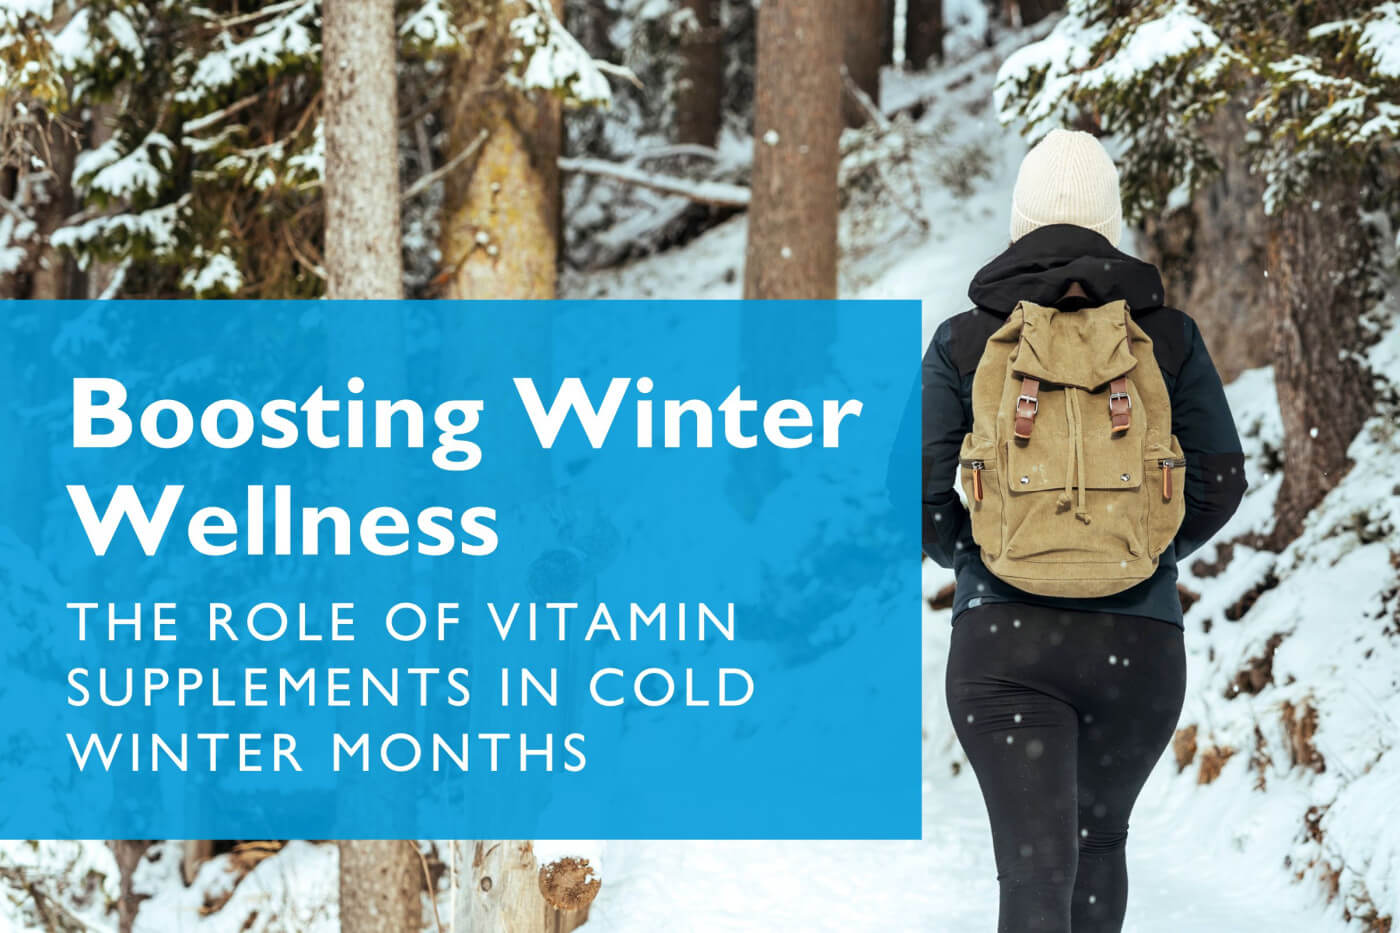 Woman walking in snowy forest | Vitamin Supplements in Cold Months Article | Celebrate Vitamins